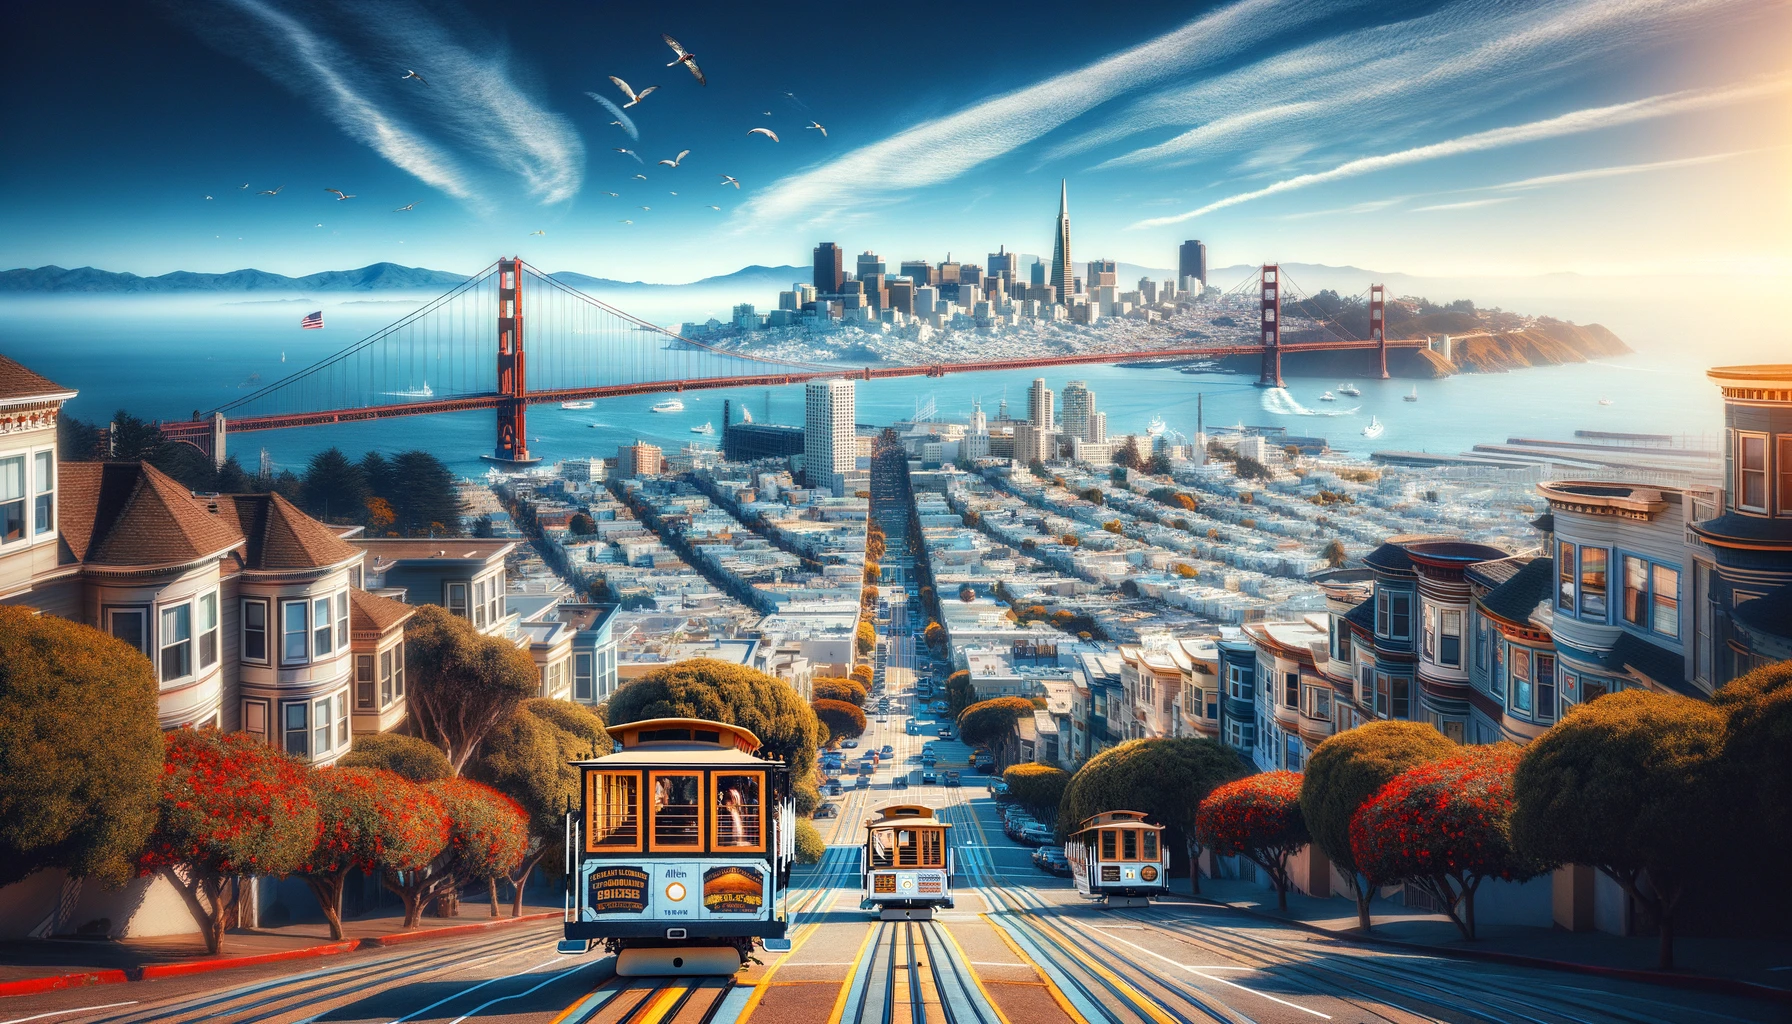 San Francisco attractions and history